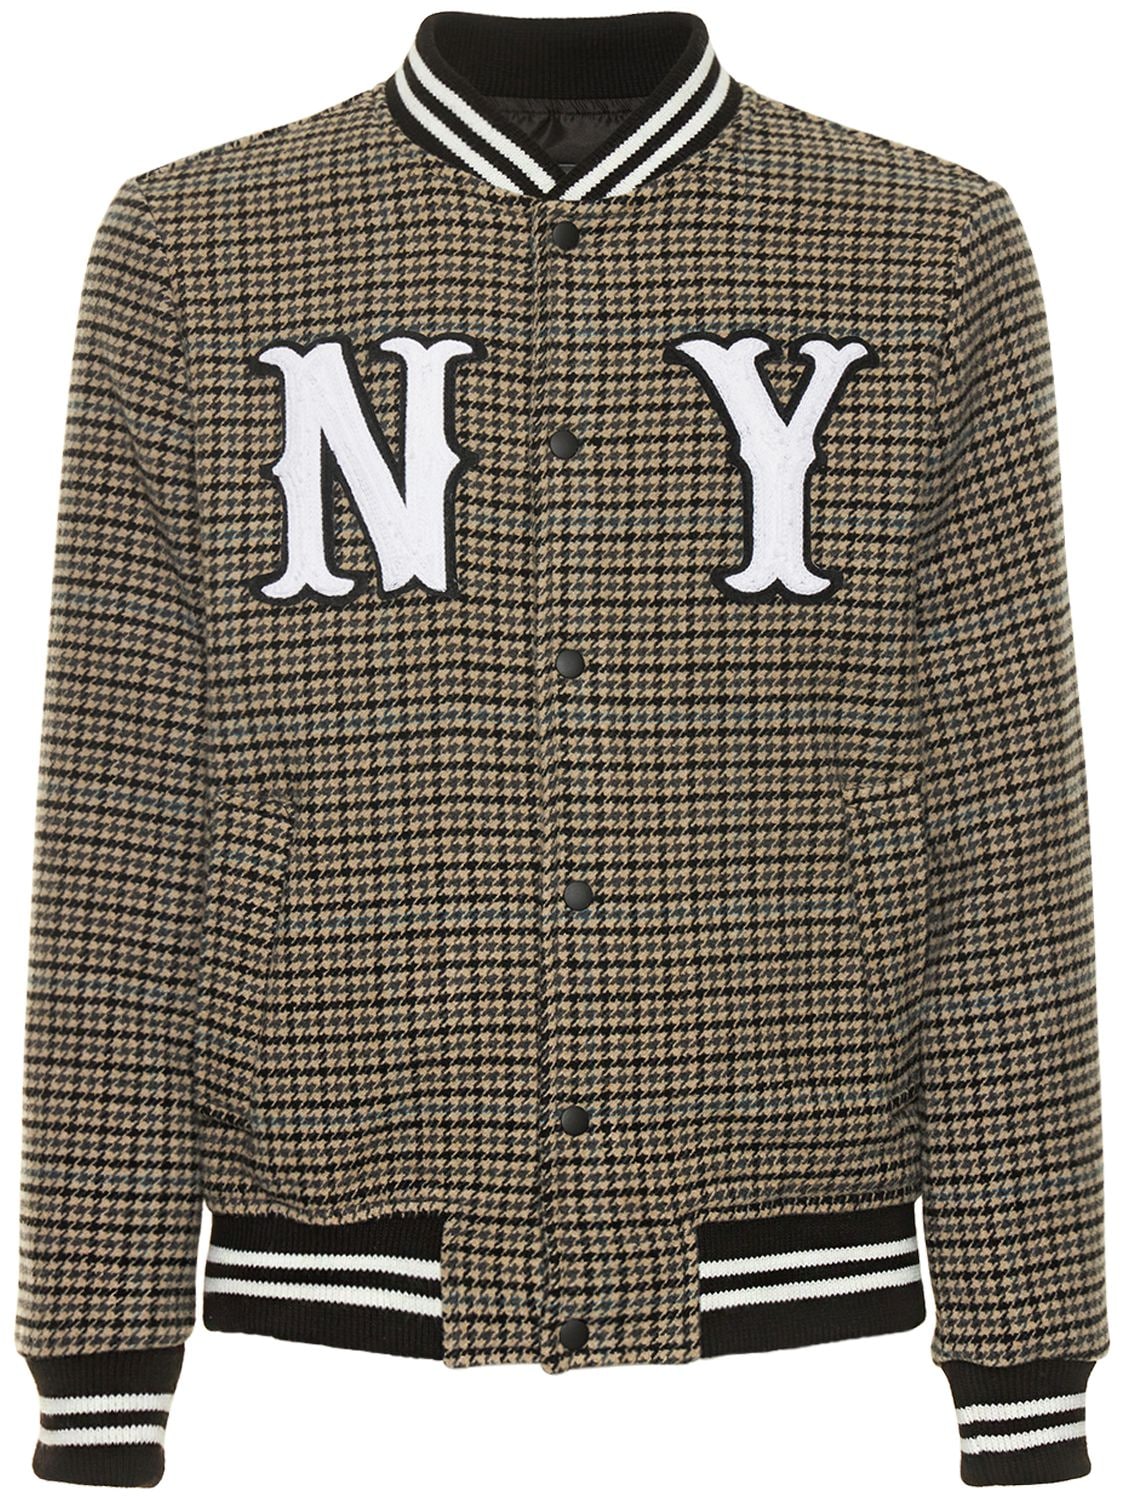 Front Street 8 Wool Blend Varsity Jacket W/ Ny Patches In Beige